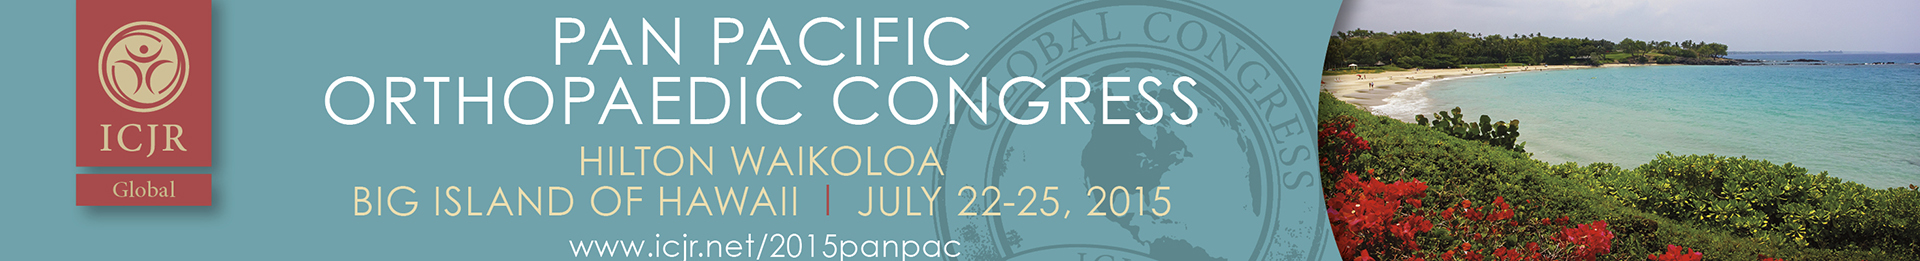 Medical, scientific and scholarly conferences:  ICJR - International Congress for Joint Reconstruction 2nd Annual Pan Pacific Orthopaedic Congress